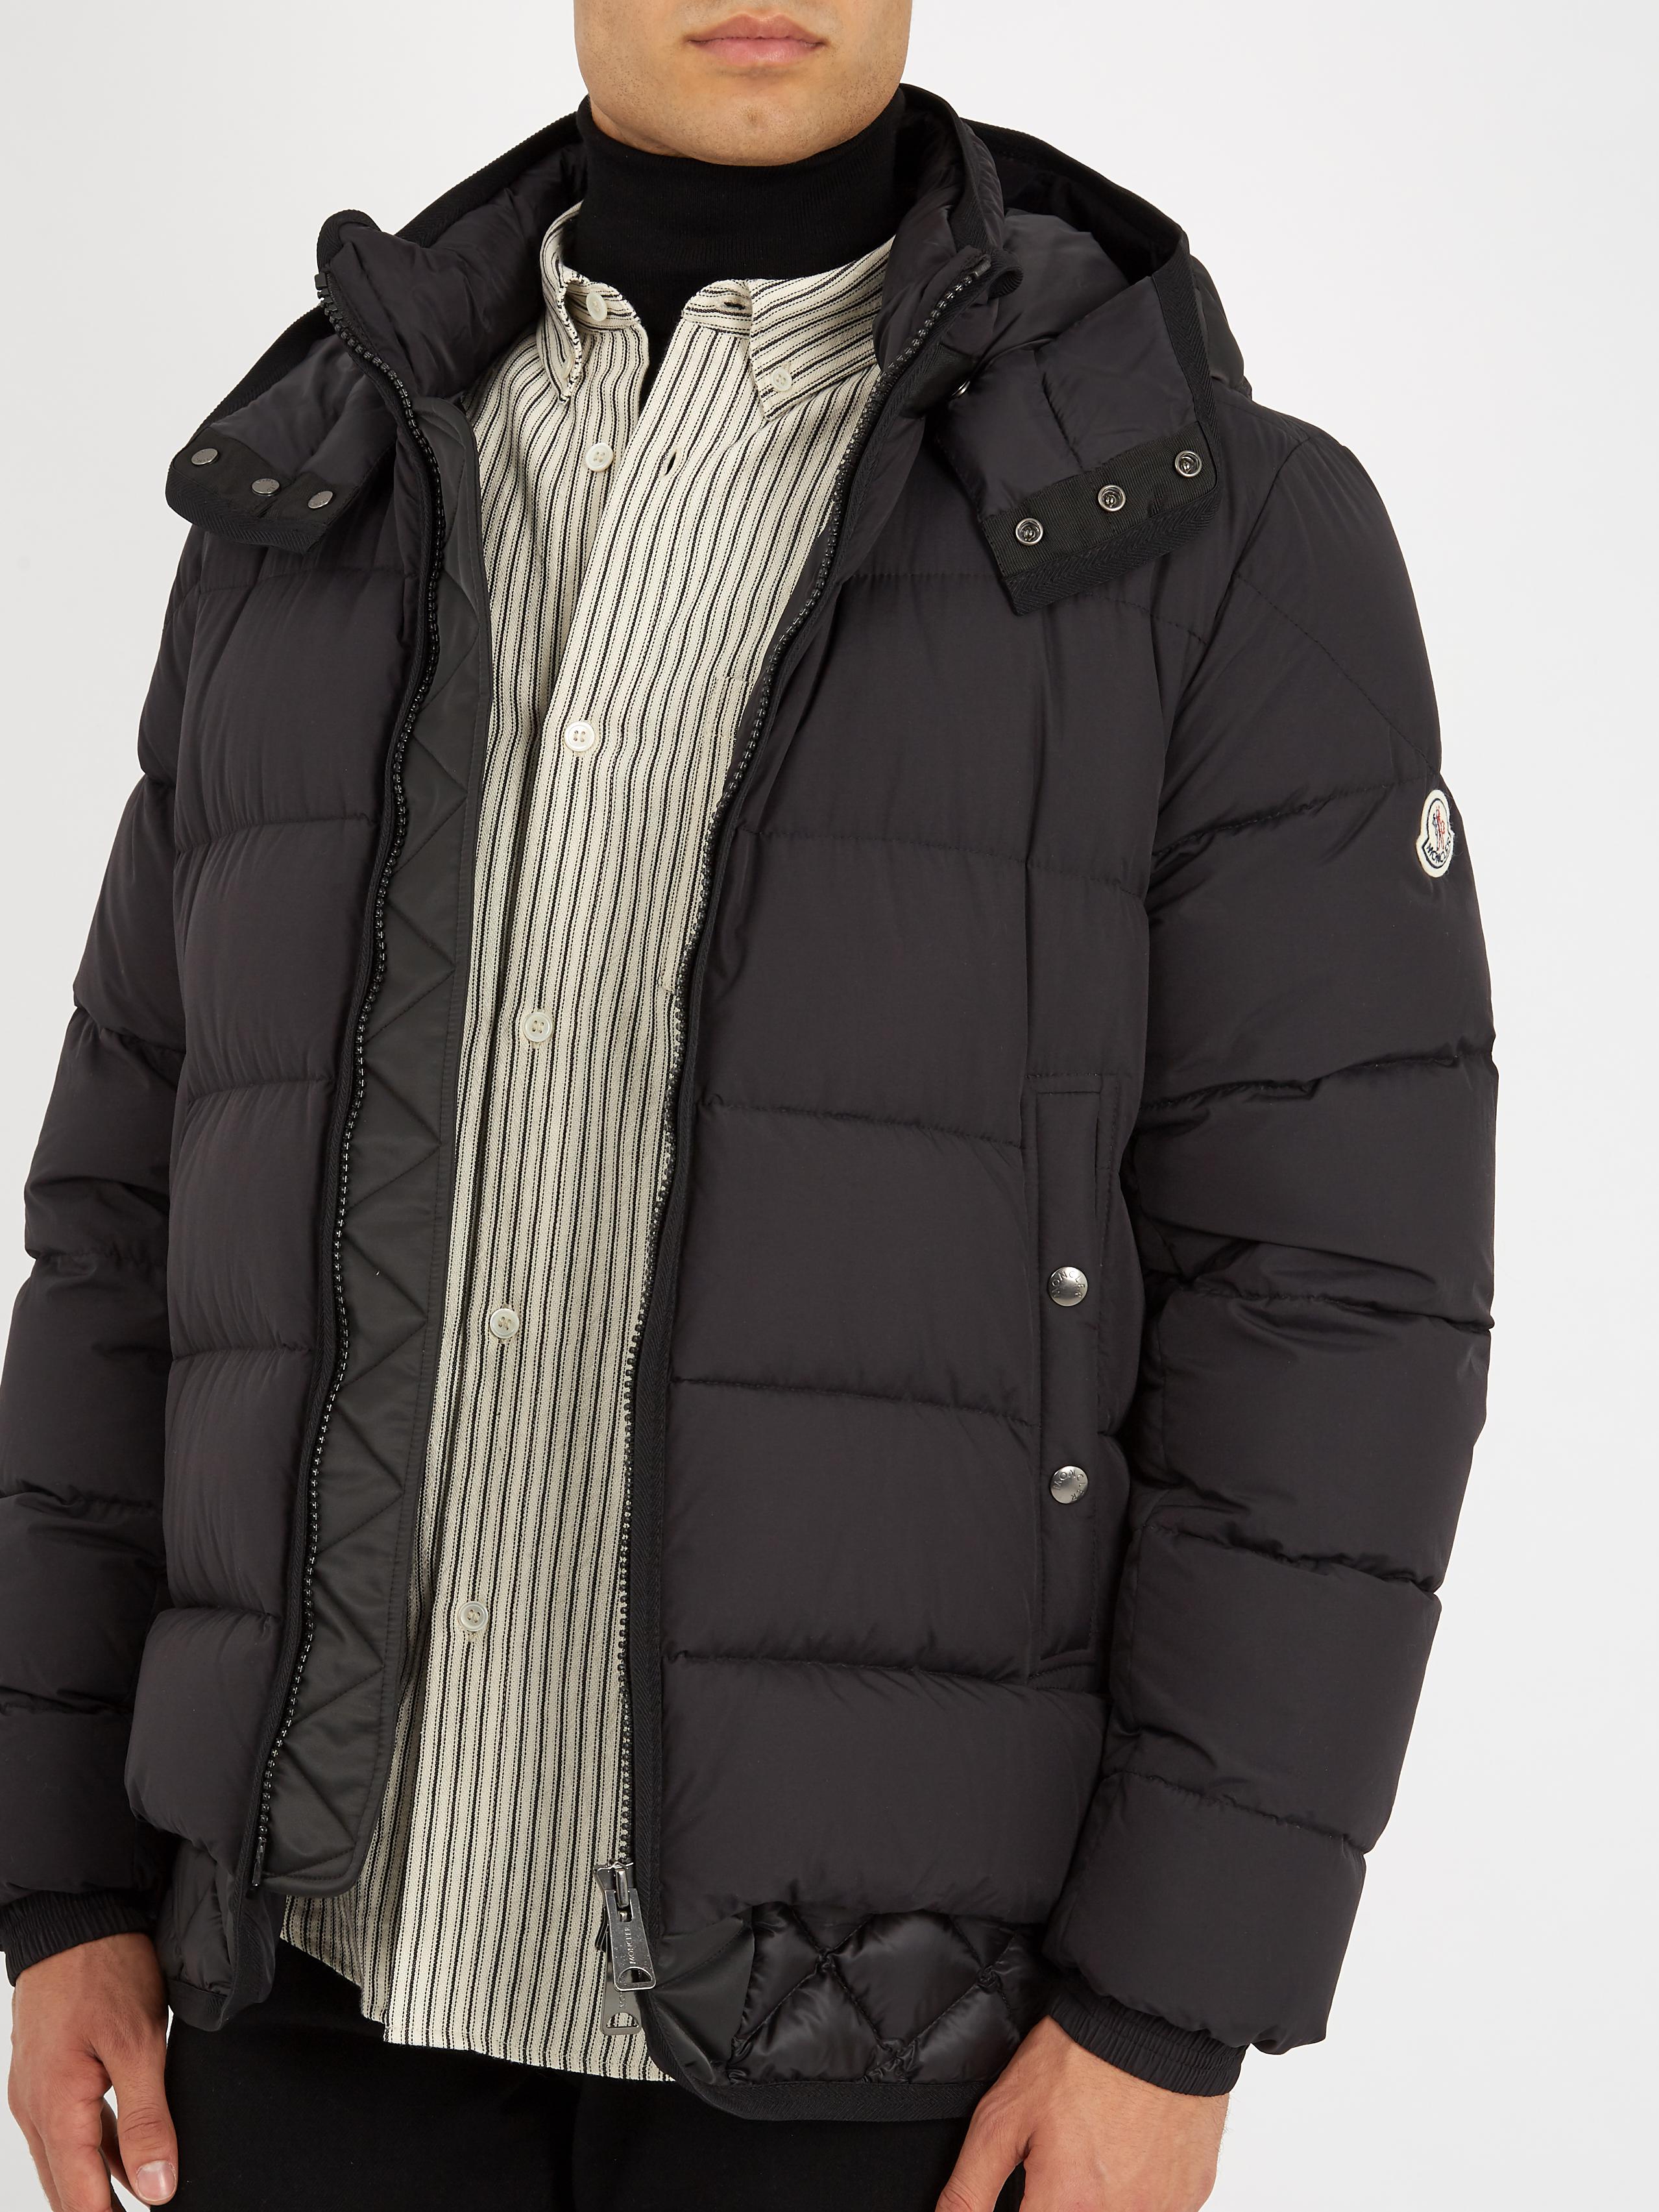 moncler tanguy, OFF 72%,Buy!